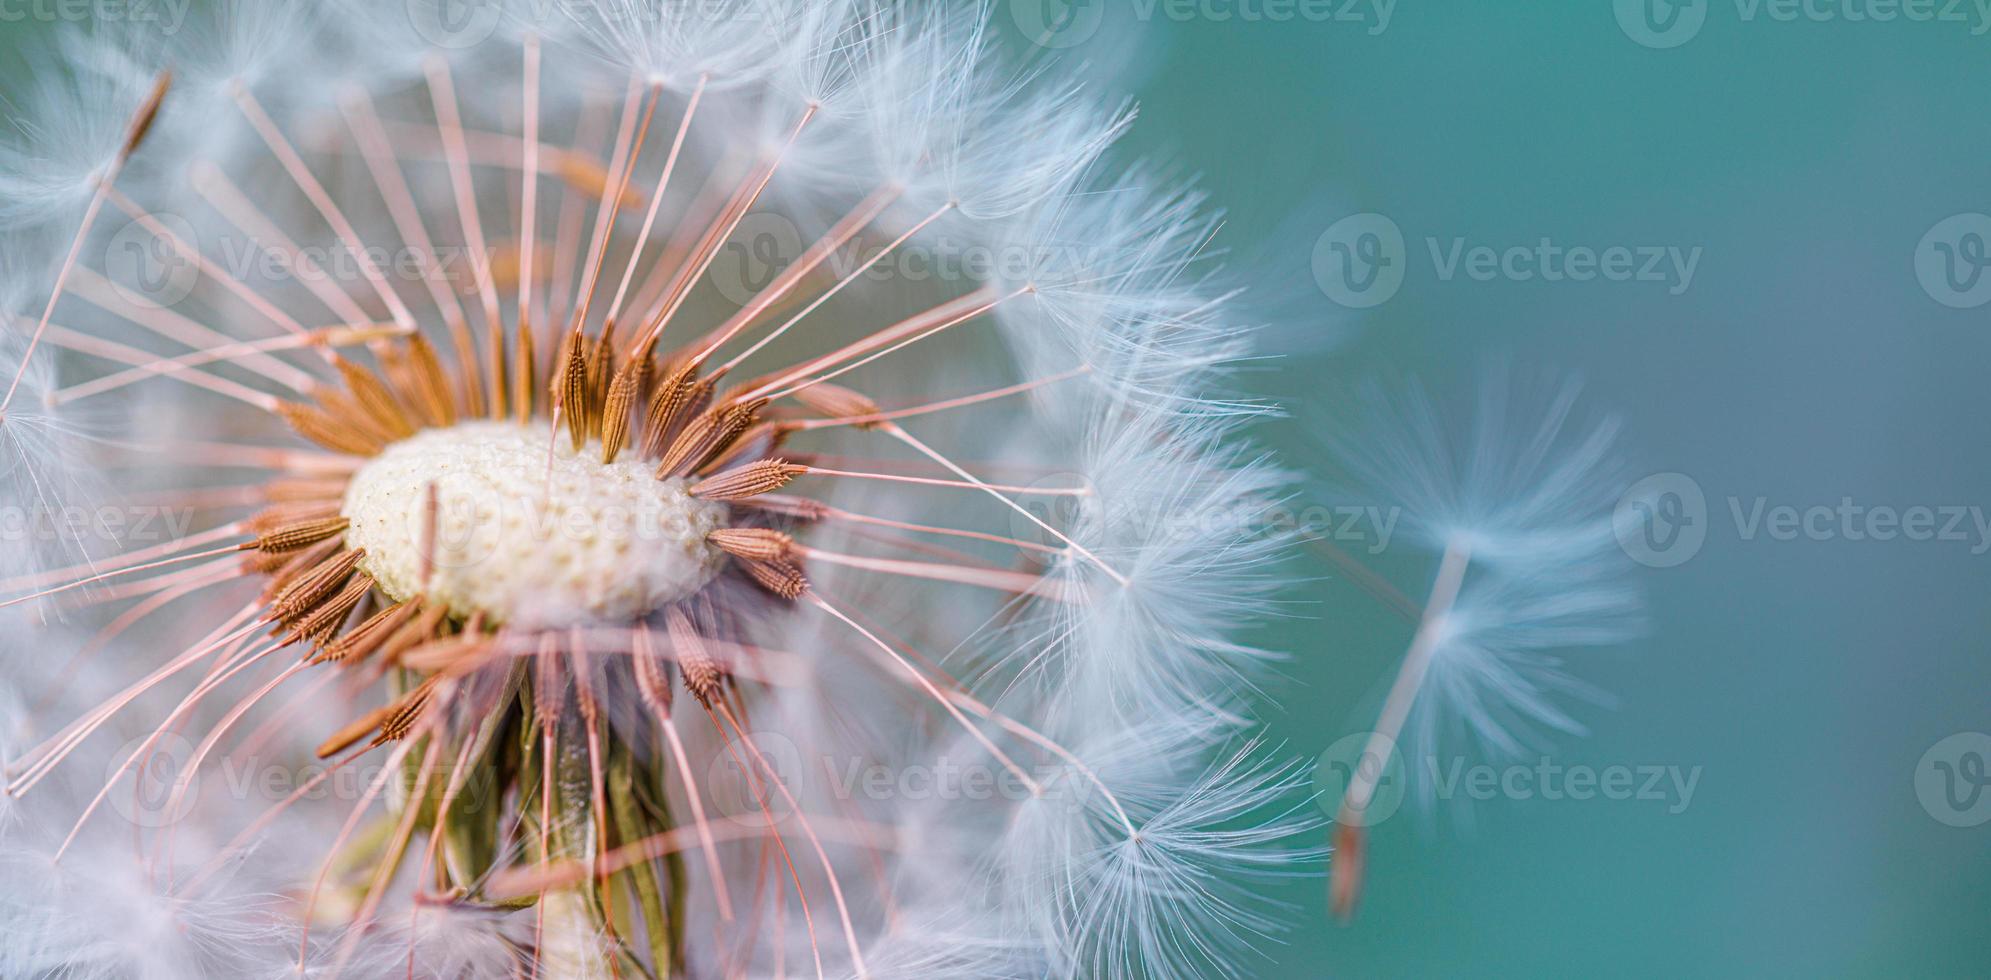 Closeup of dandelion on natural light banner, artistic nature closeup. Spring summer background. Dream nature macro, floral plant. Abstract soft blue green seasonal wildflower. Wish and dream concept photo